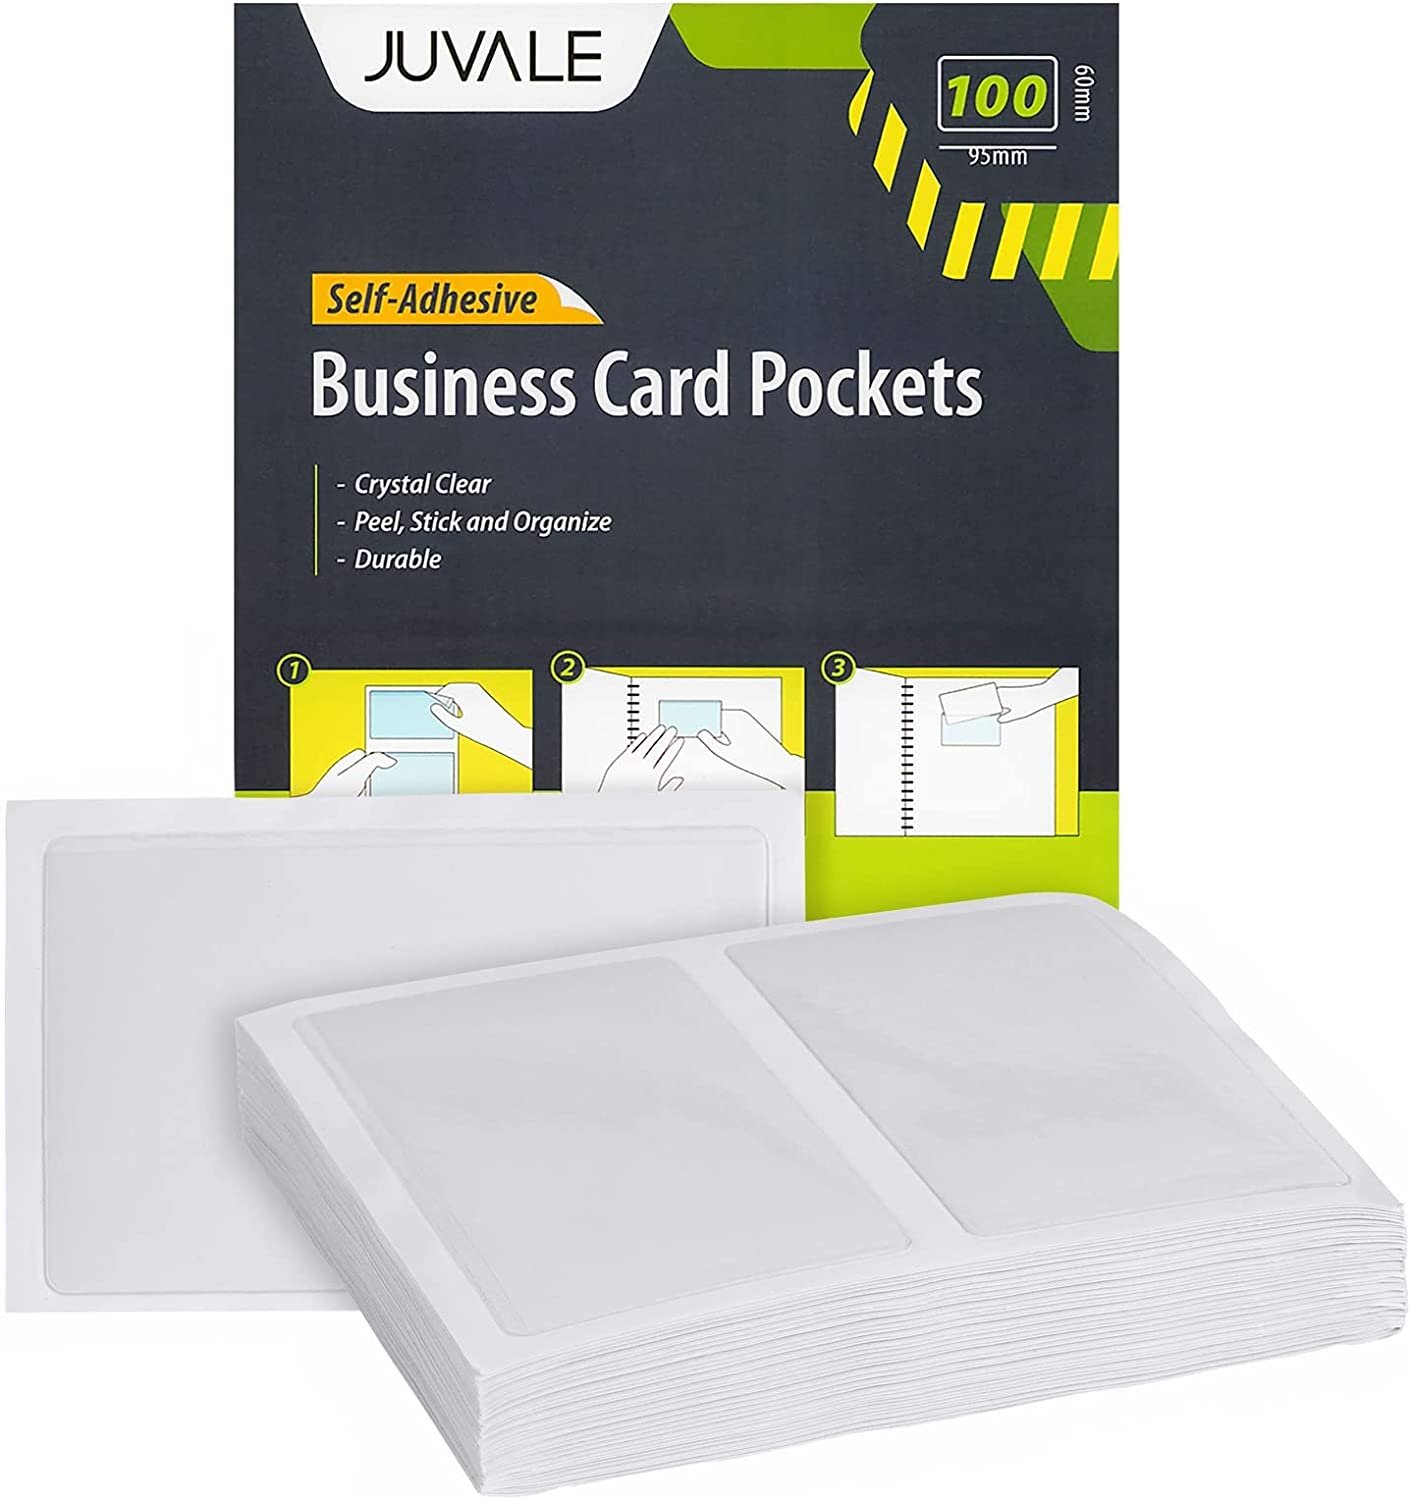 Clear business card pocket holders